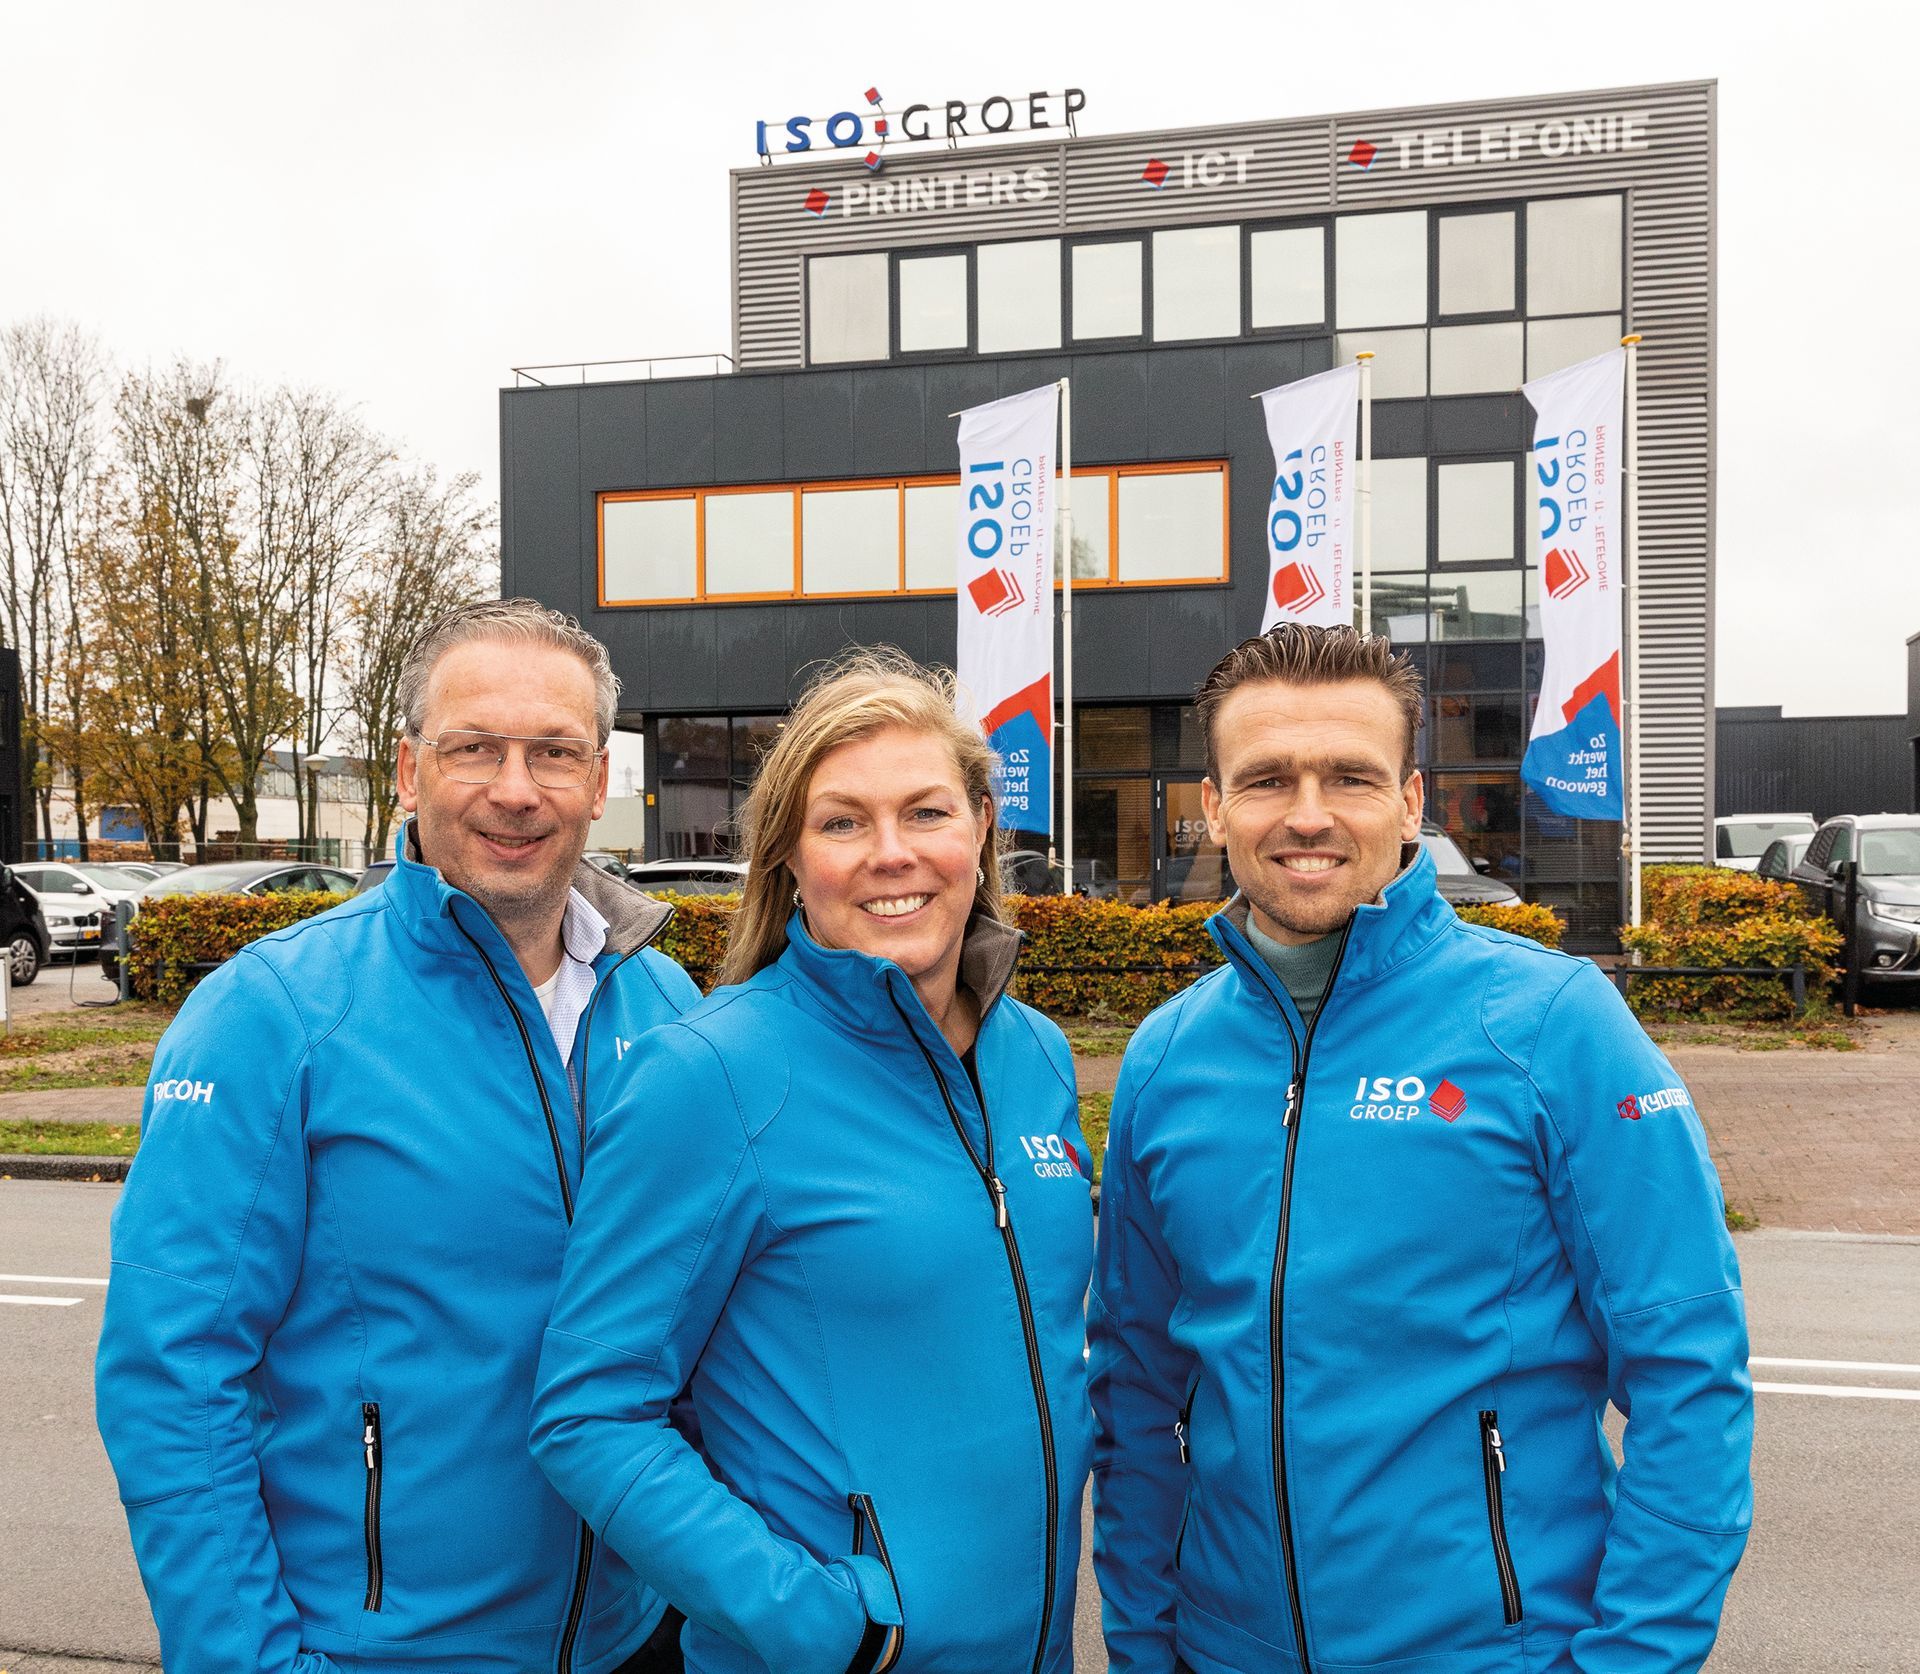 three people wearing iso group jackets stand in front of a building